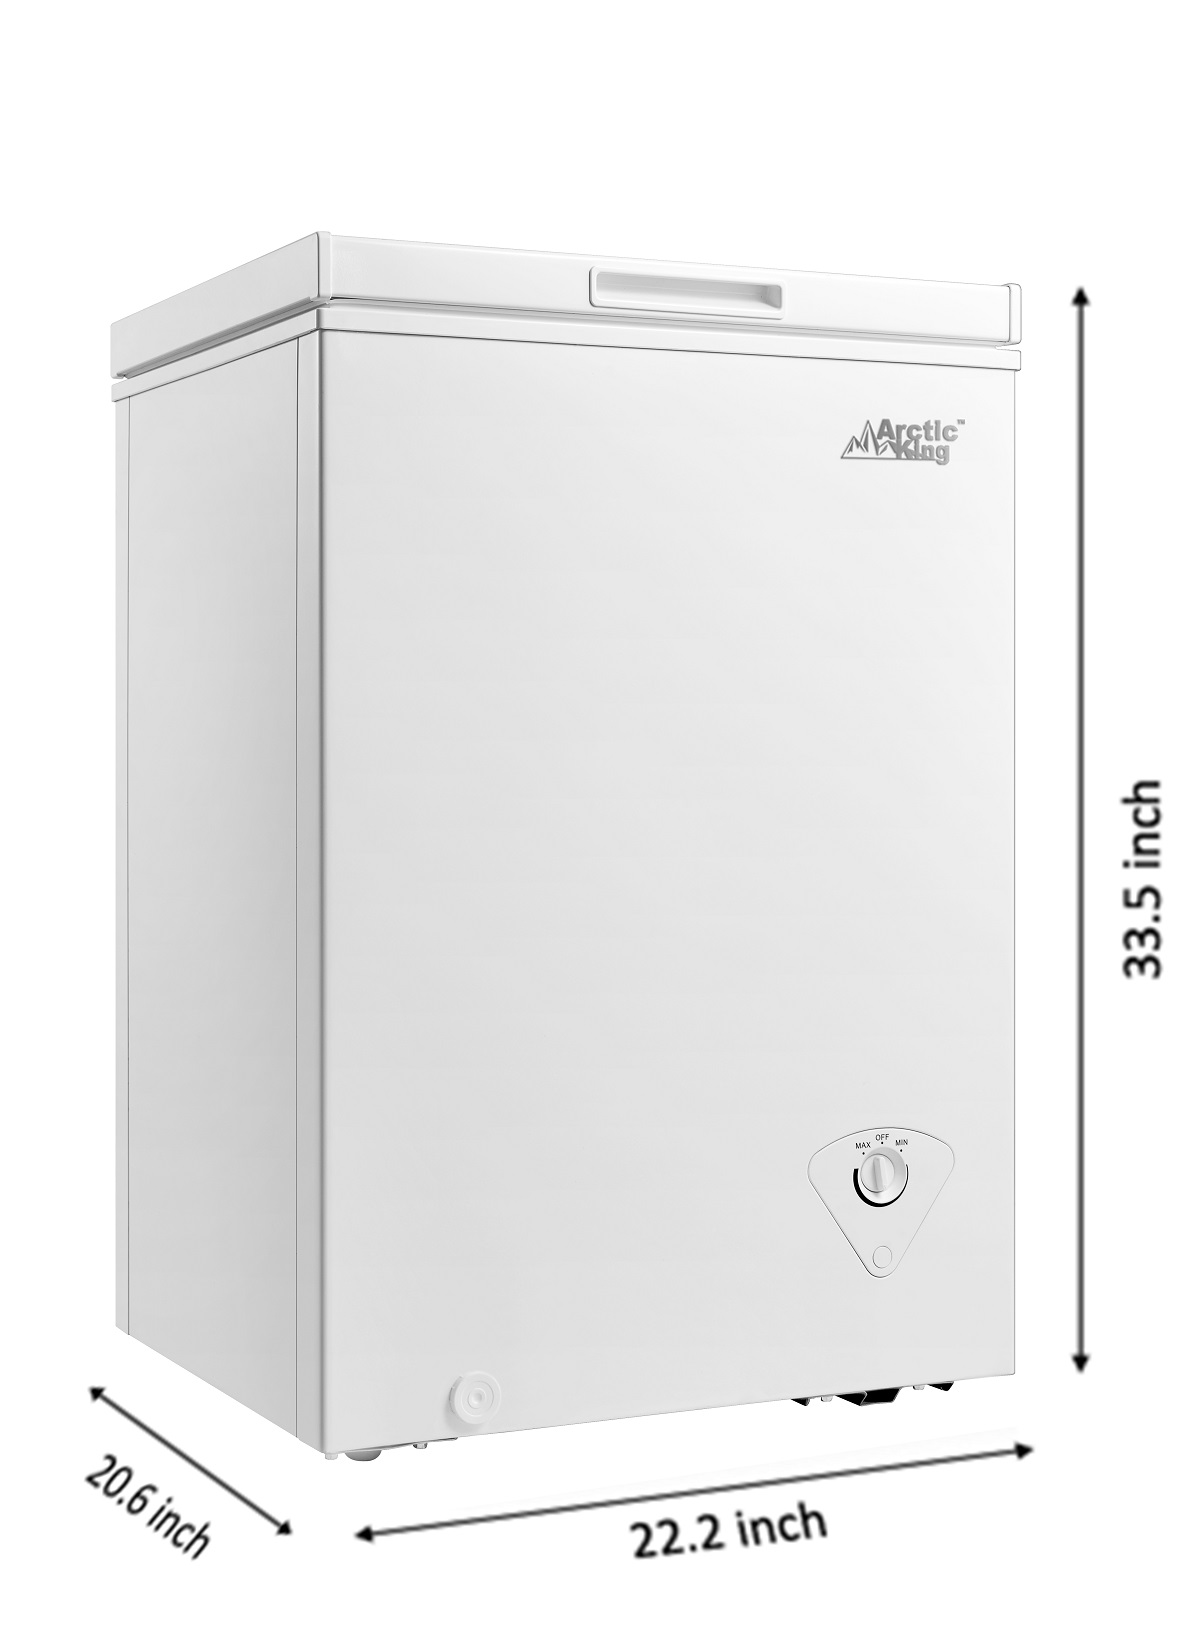 Arctic King 3.5 Cu ft Chest Freezer, White - image 4 of 5